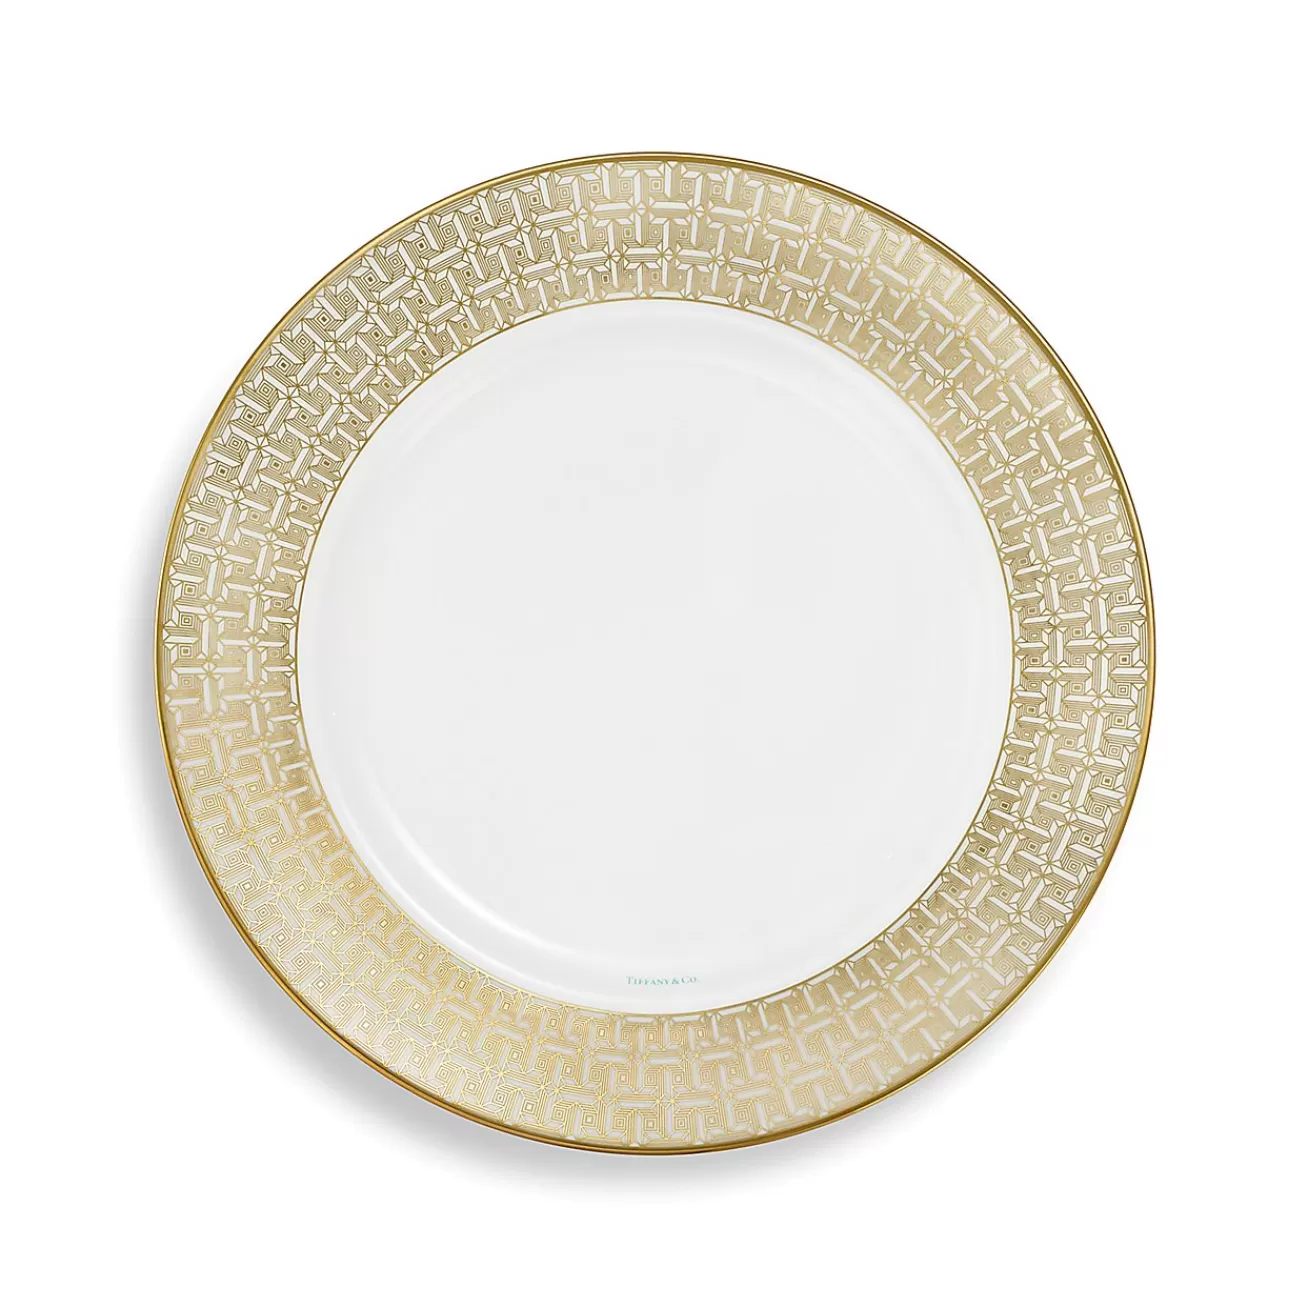 Tiffany & Co. Tiffany T True Dinner Plate with a Hand-painted Gold Rim | ^ The Home | Housewarming Gifts